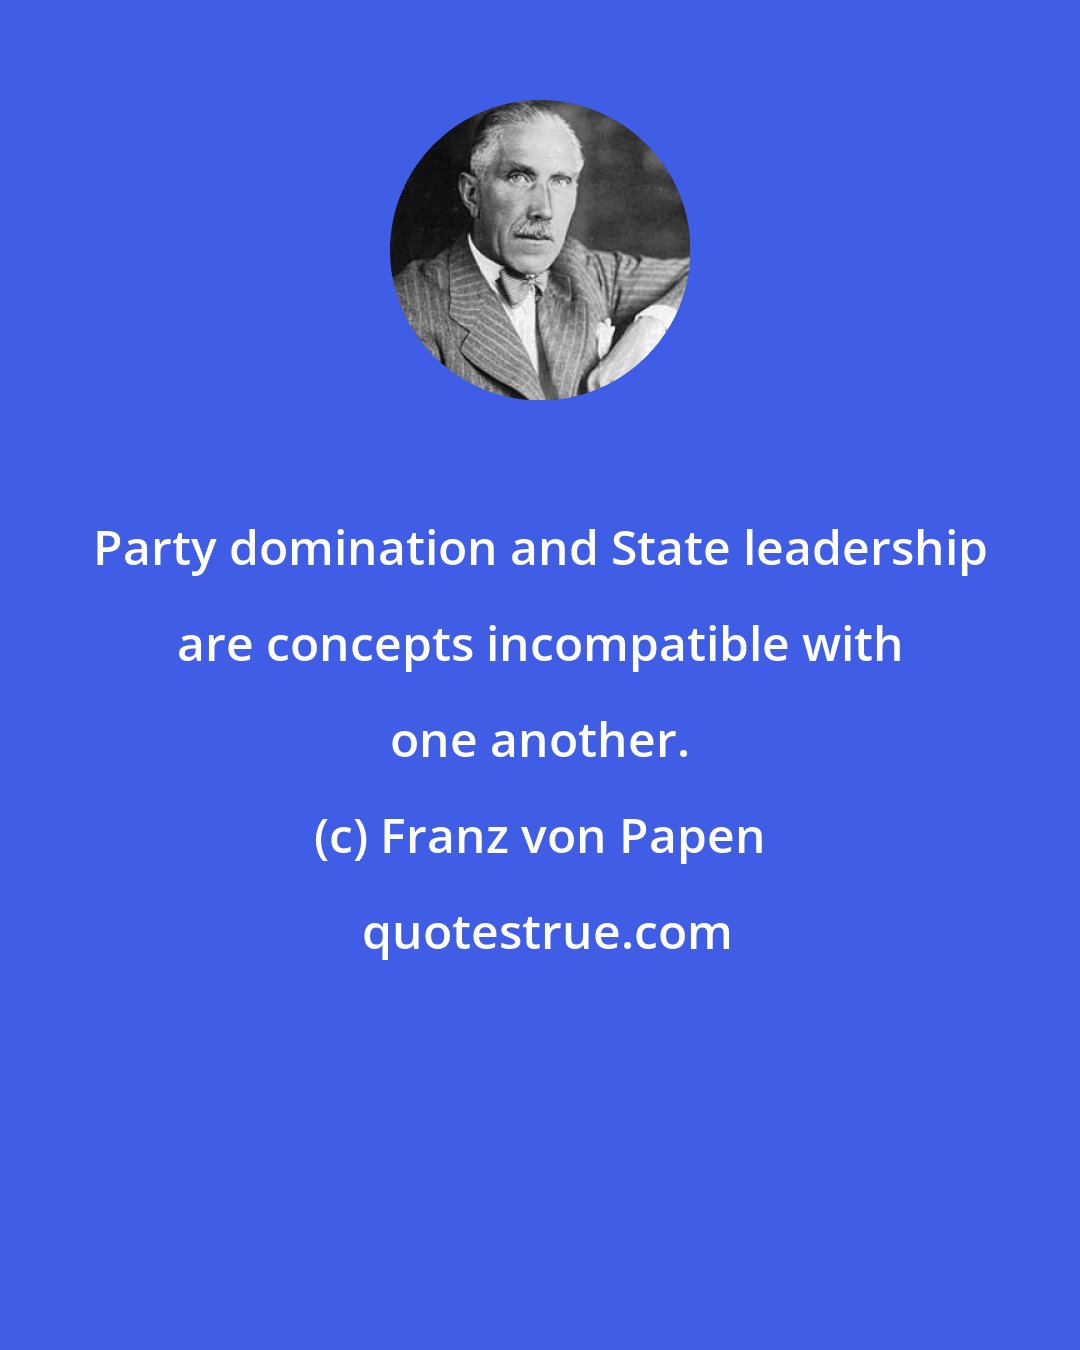 Franz von Papen: Party domination and State leadership are concepts incompatible with one another.